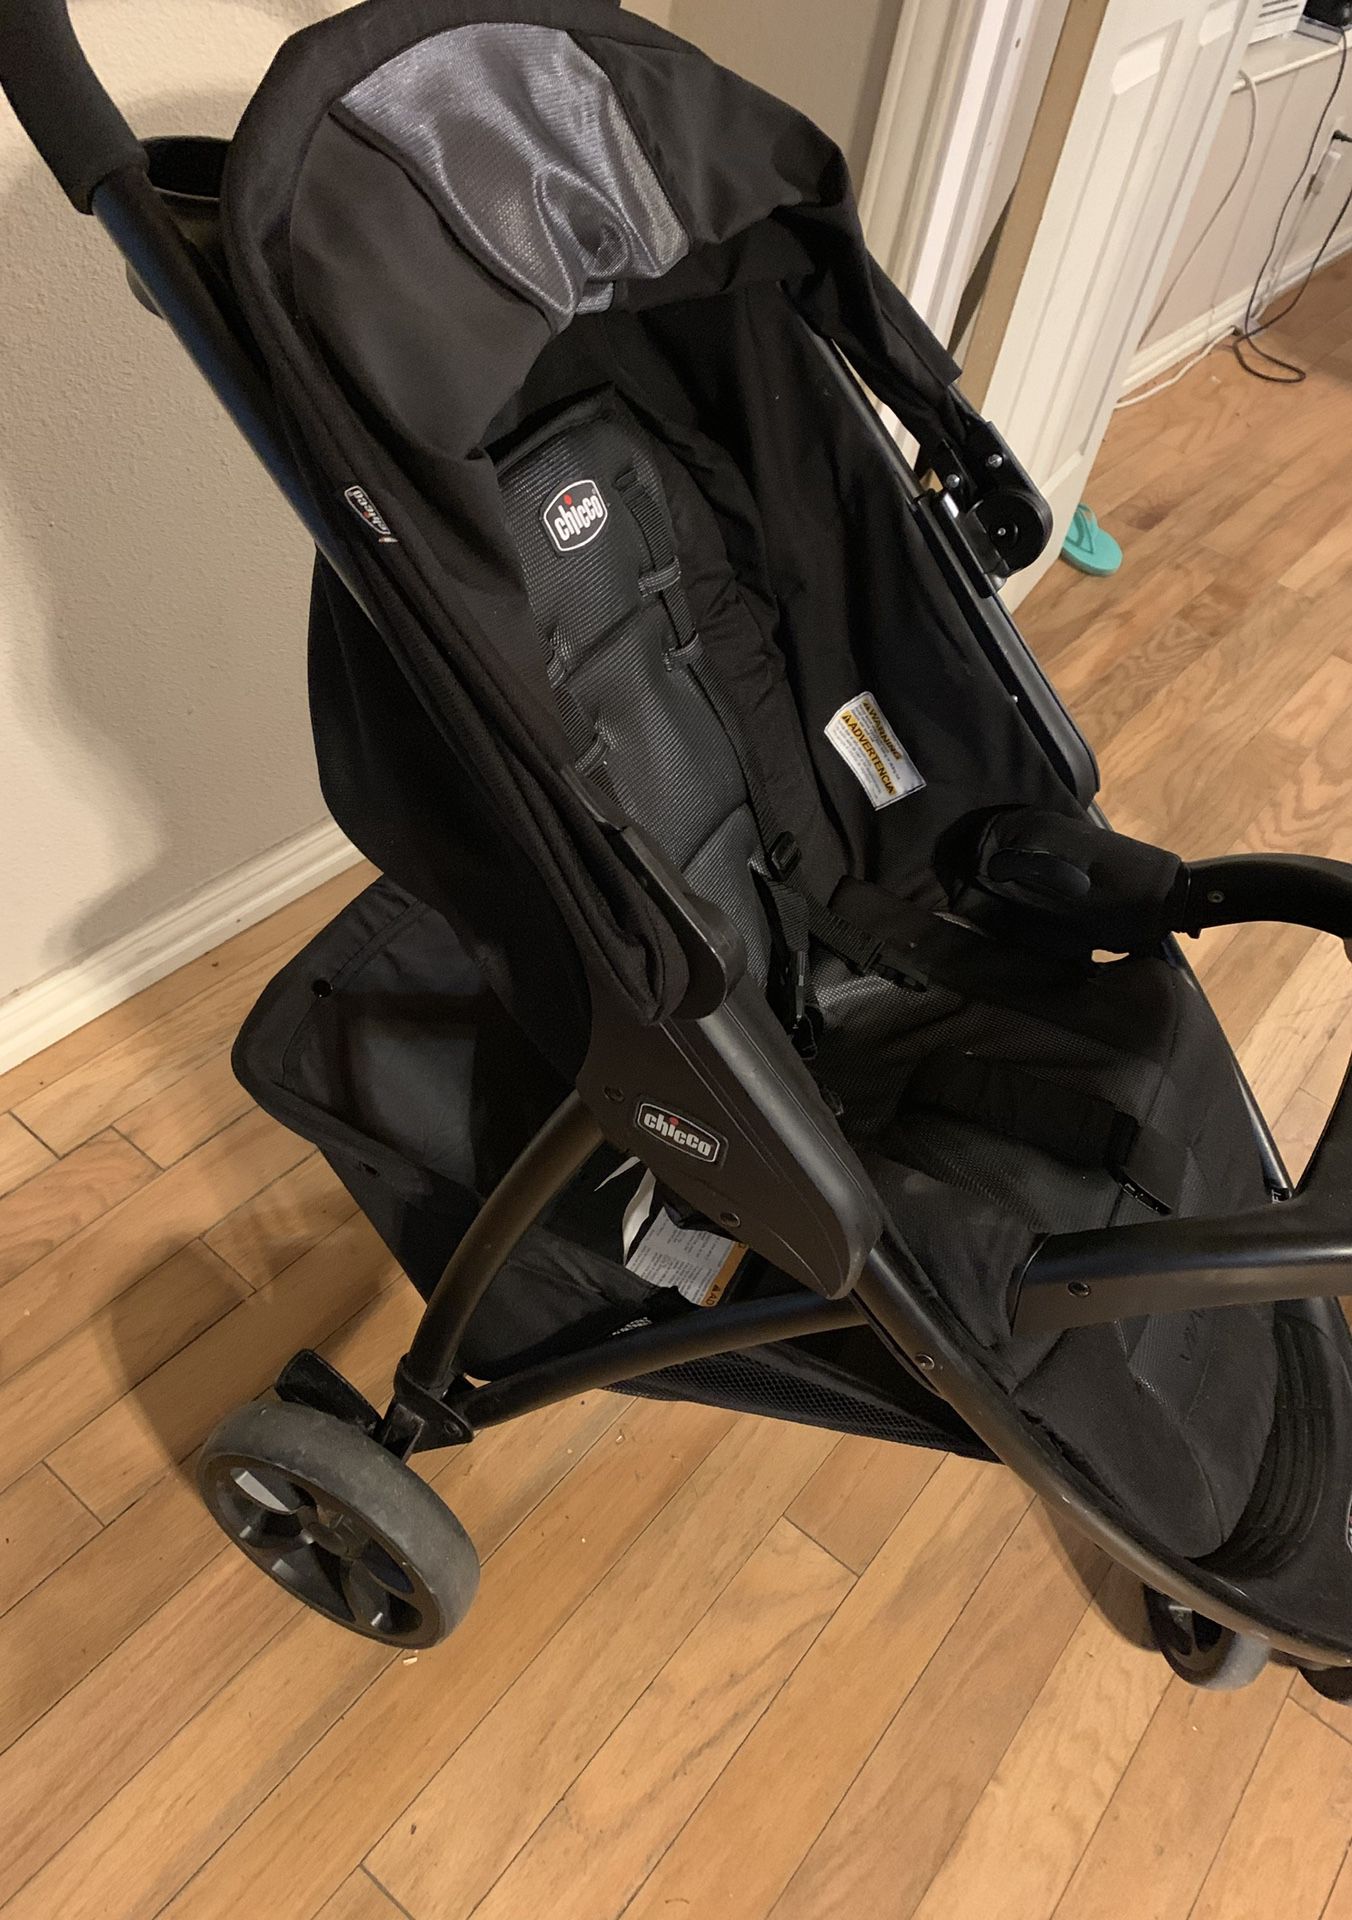 Chicco car seat and stroller